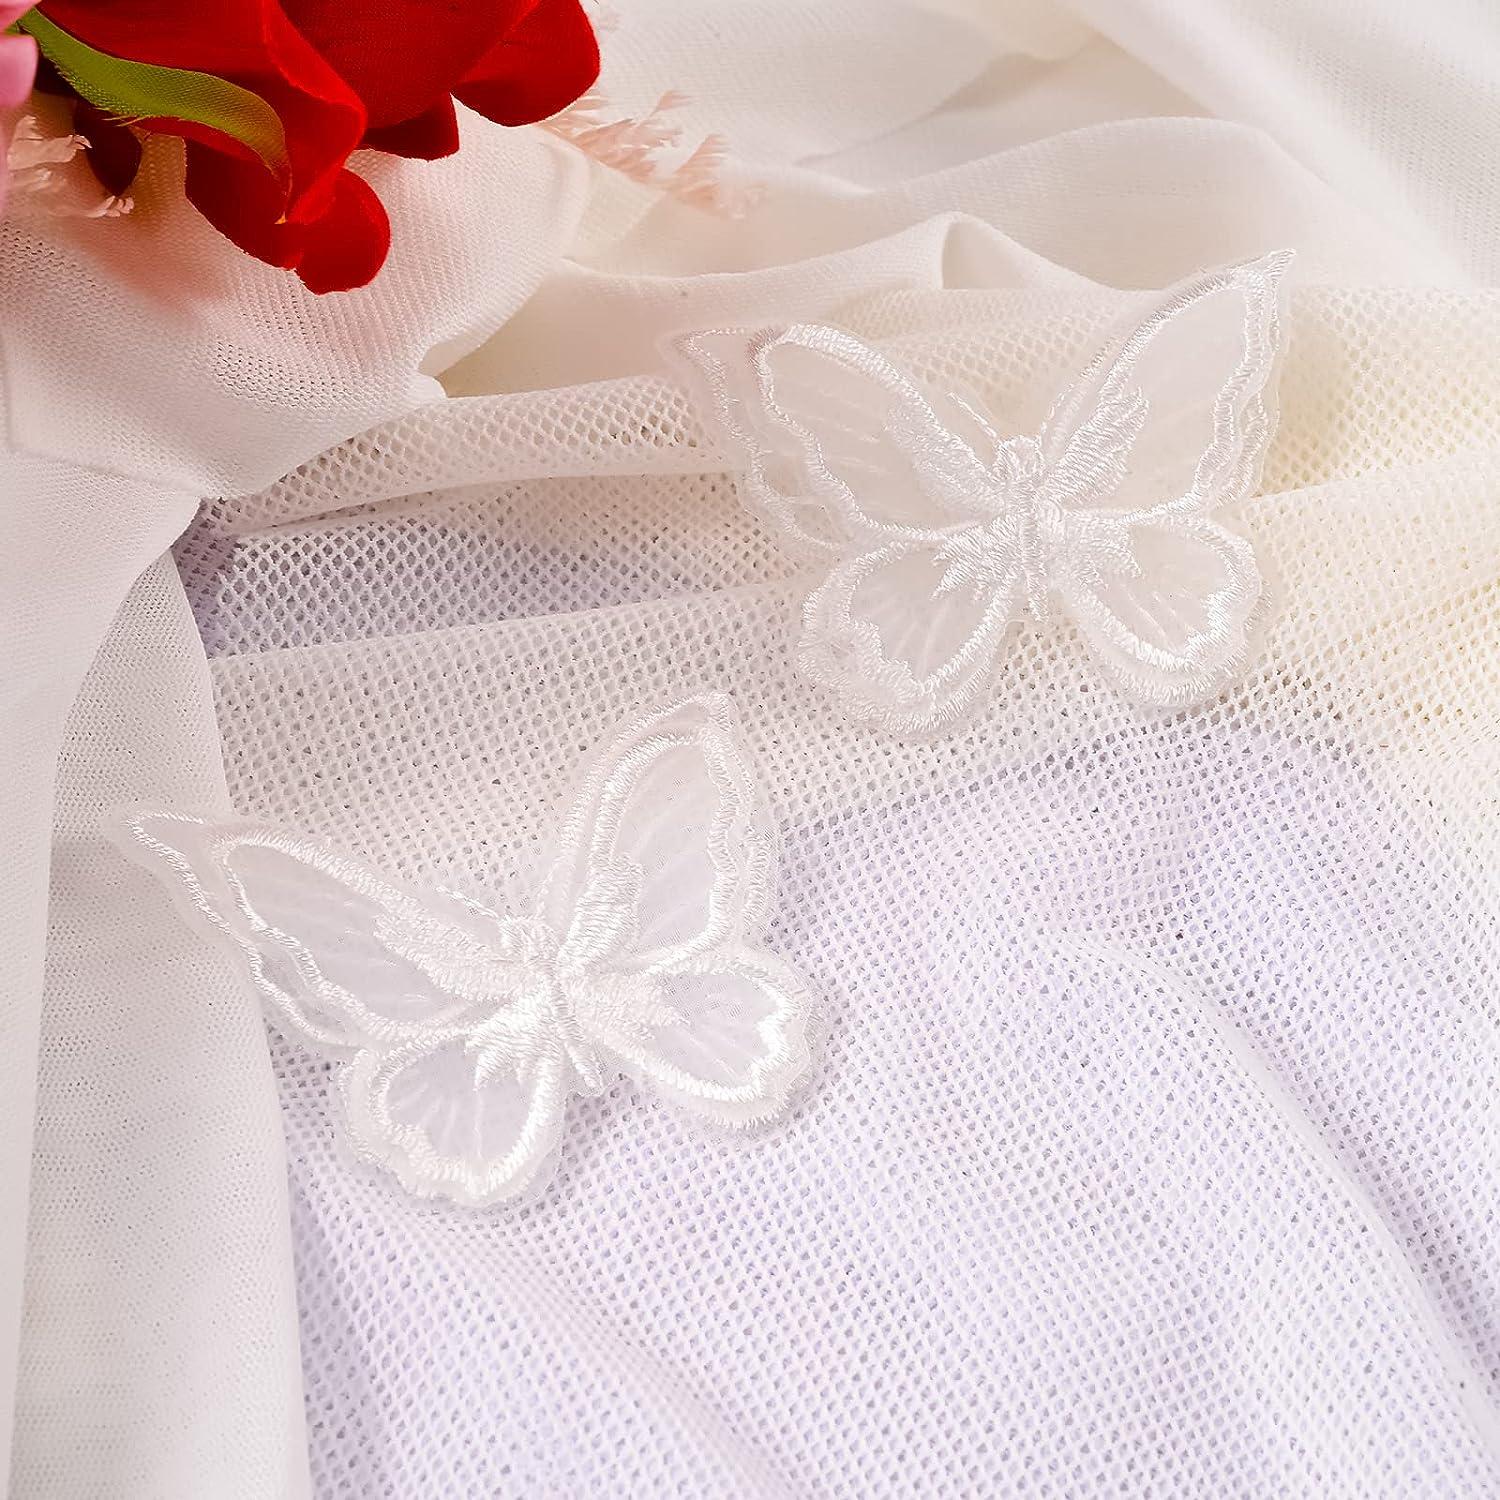 Soft Lace Butterfly Iron on Patches 3D Embroidered Appliques for DIY  Clothing Dress Organza Curtain Hole Repair Stripes Clothes